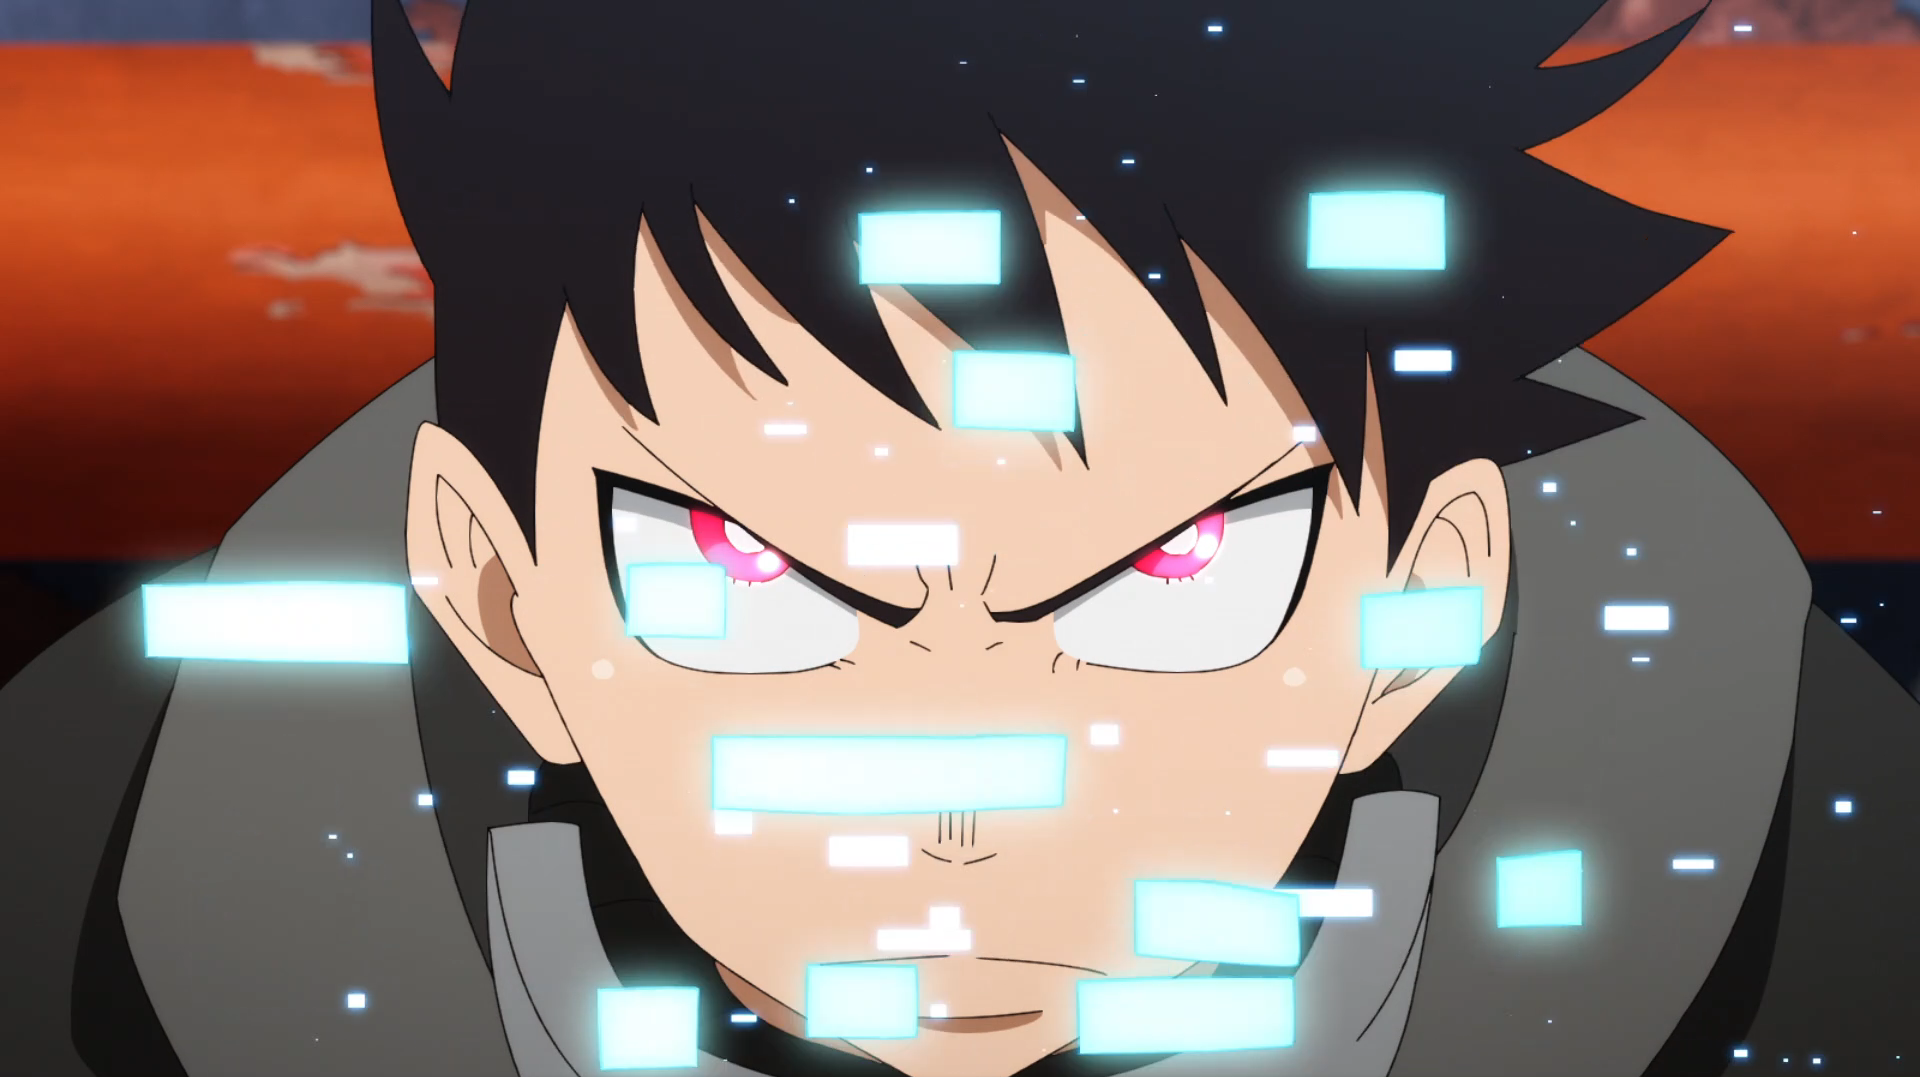 Fire Force Season 2, Episode 1 - A Fire Soldier's Fight (Review)